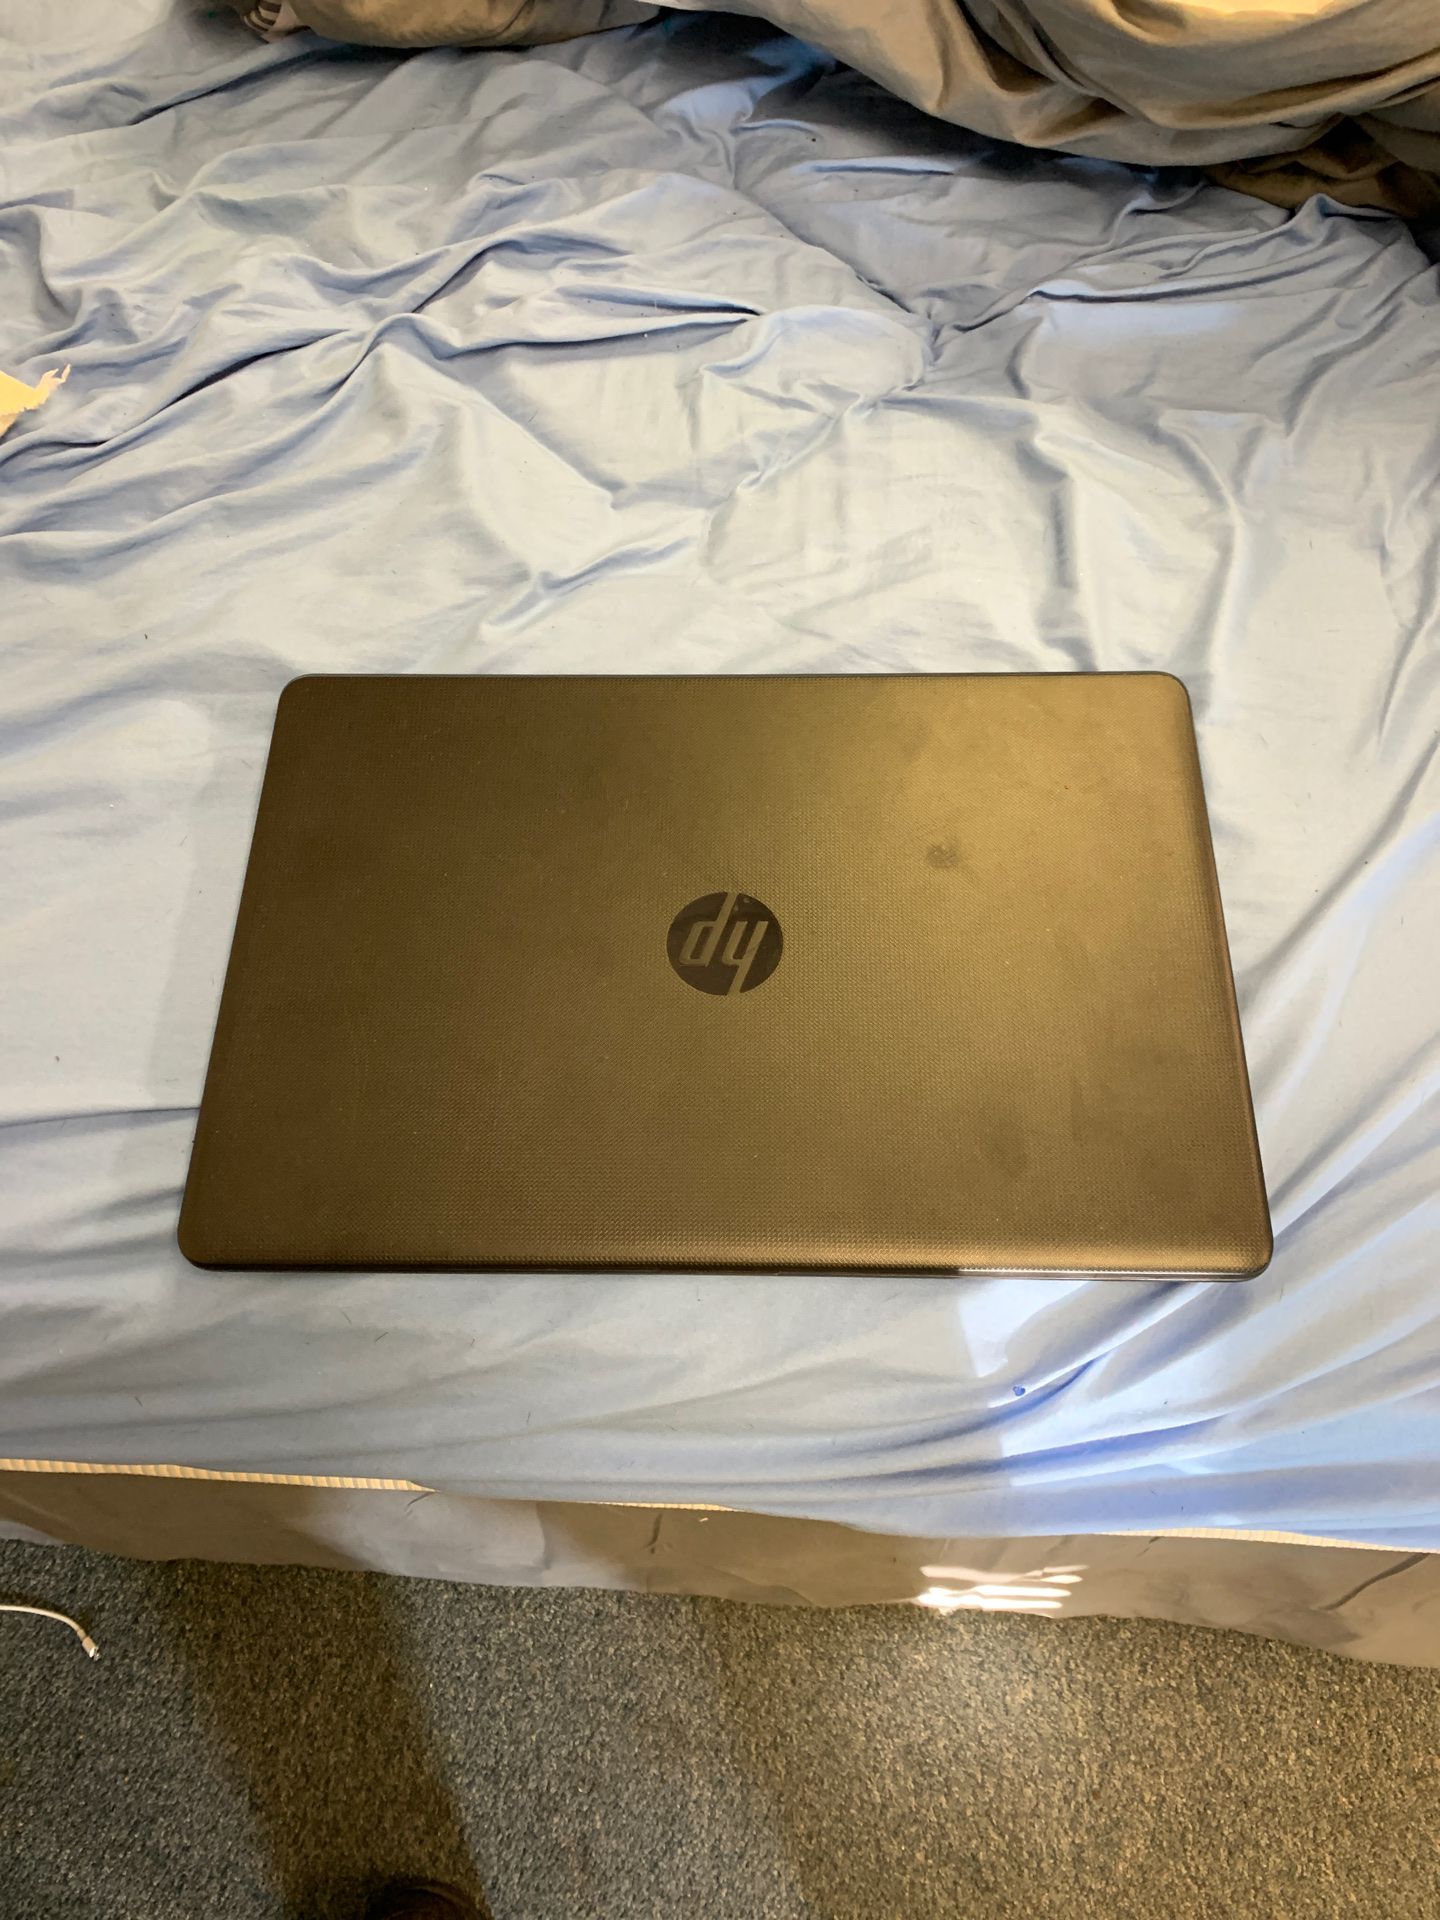 Hp laptop with 1tb pentium silver hard drive